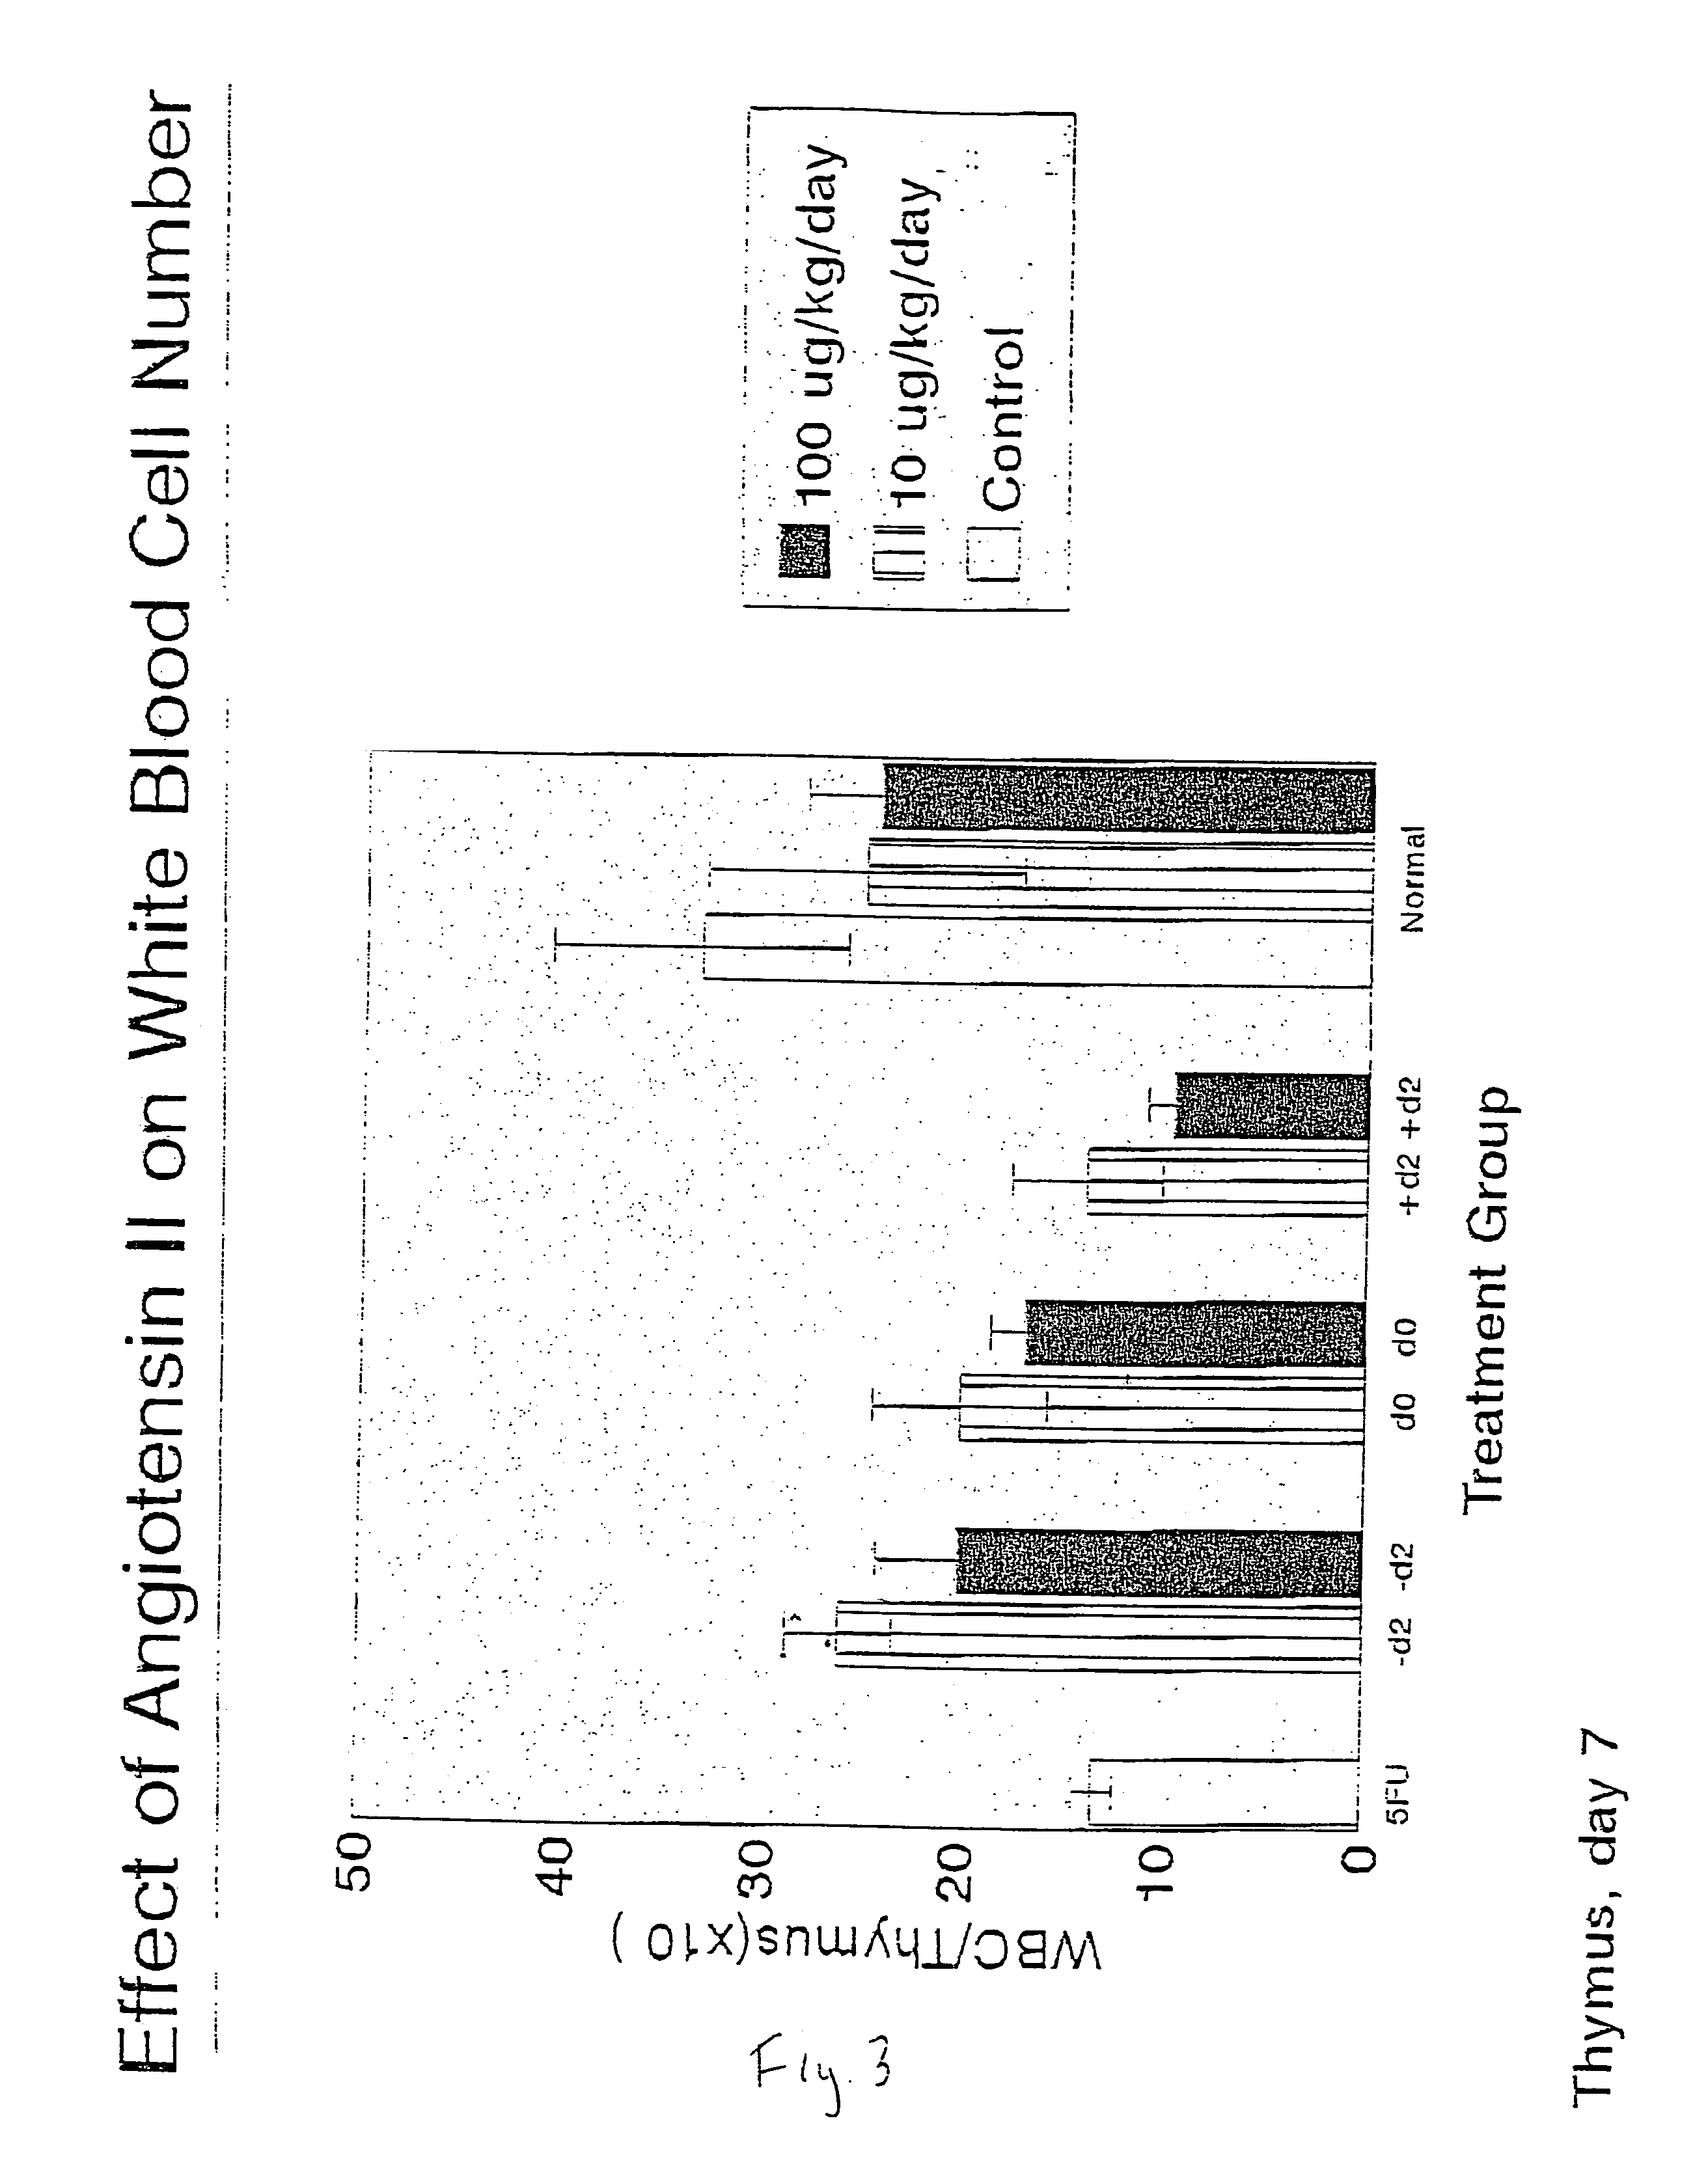 Method for promoting hematopoietic and mesenchymal cell proliferation and differentiation